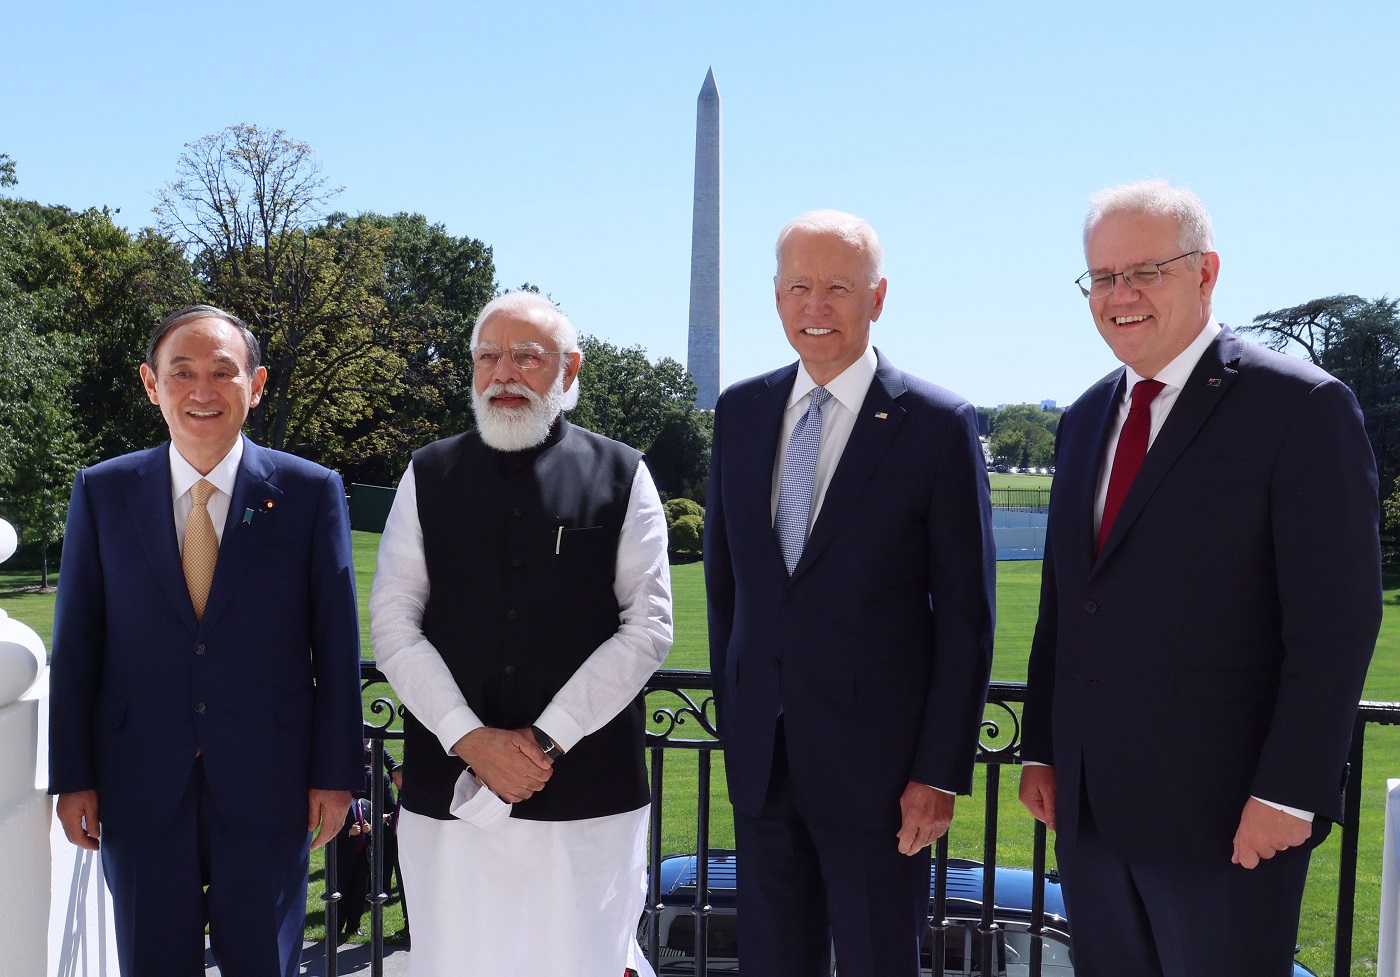 Photograph  of the photograph session with the leaders of the United States, Australia, and India (2)